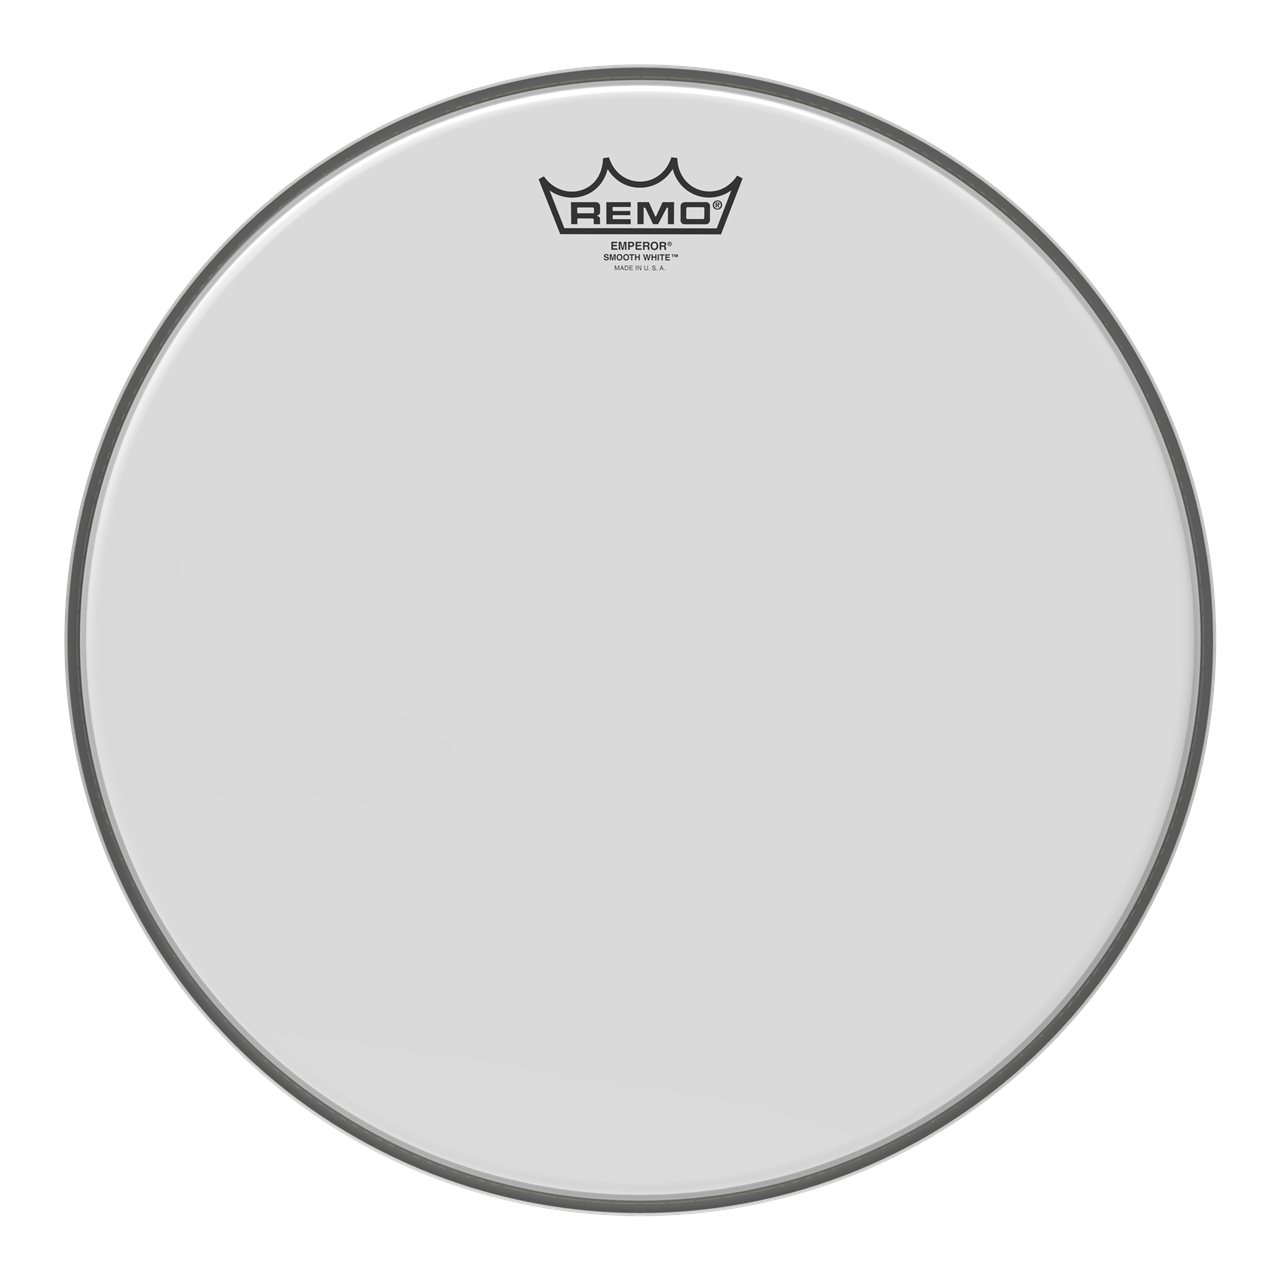 Remo BE-0216-00 Emperor, 16" Smooth White